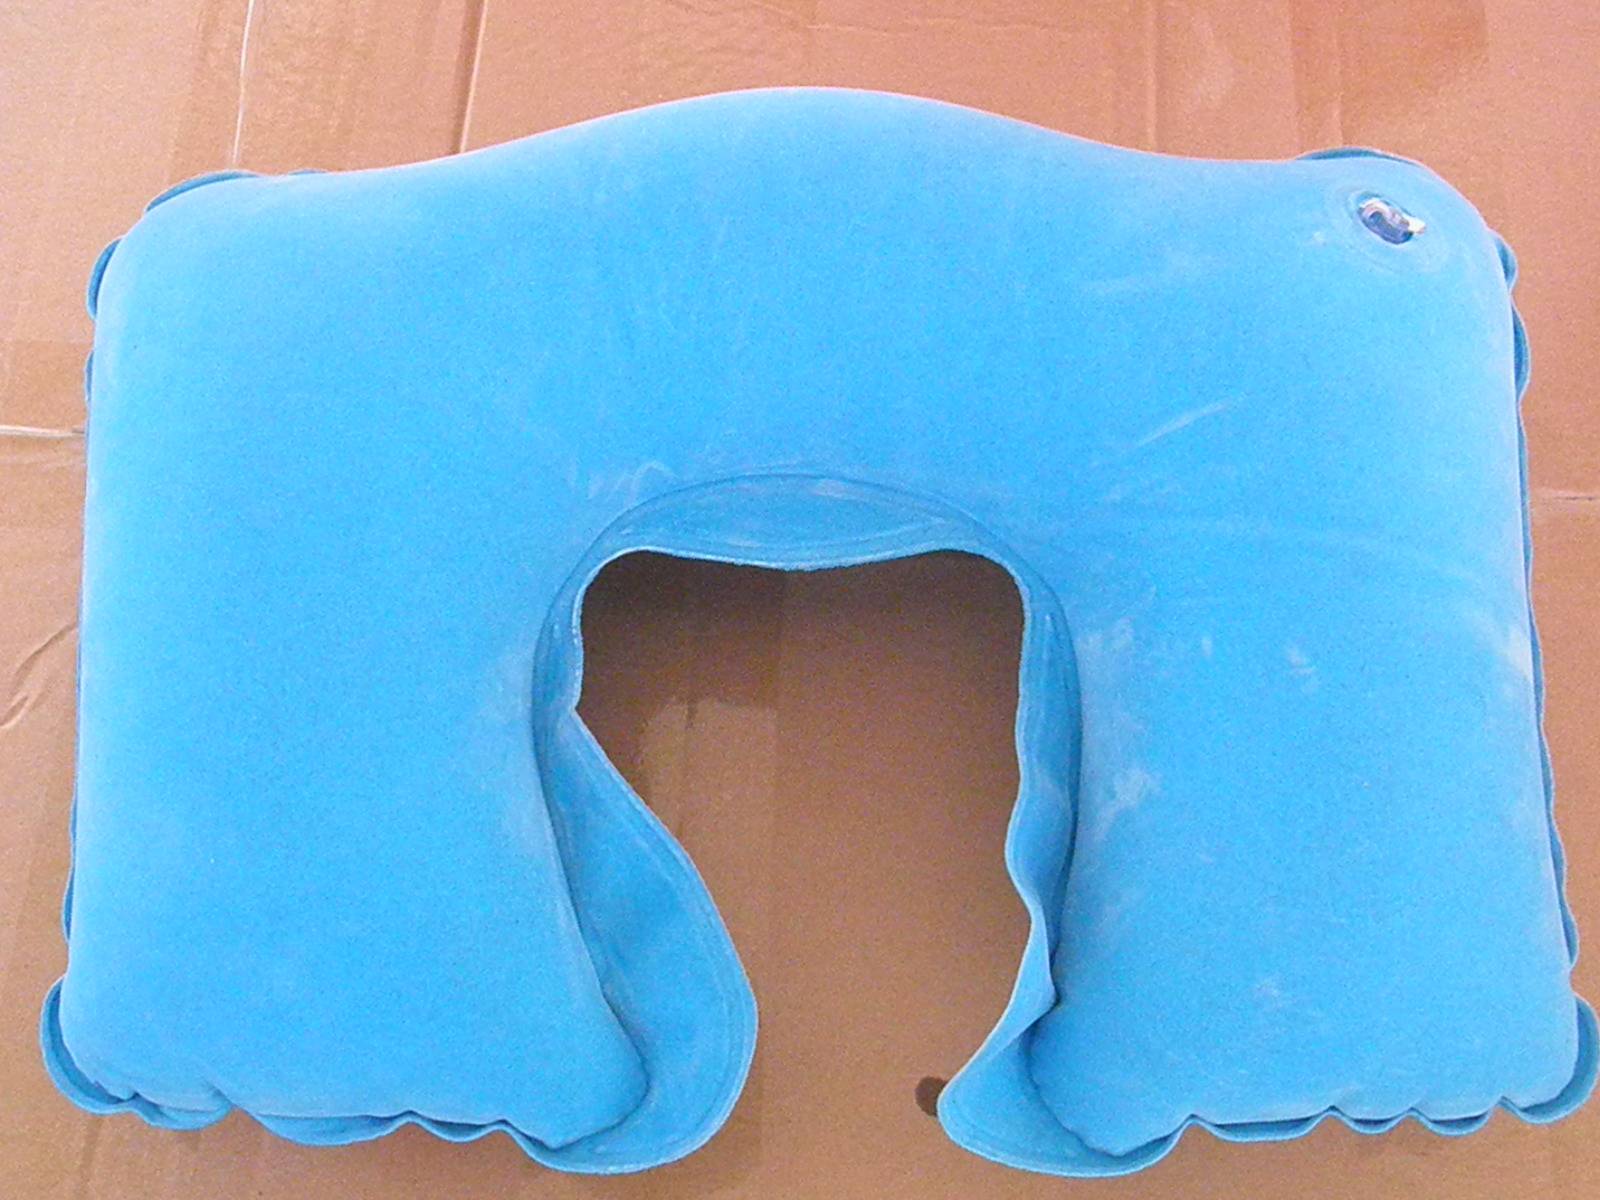 Customised Inflatable Pillows Compressible, Compact,Comfortable, Ergonomic Pillow For Neck Rest